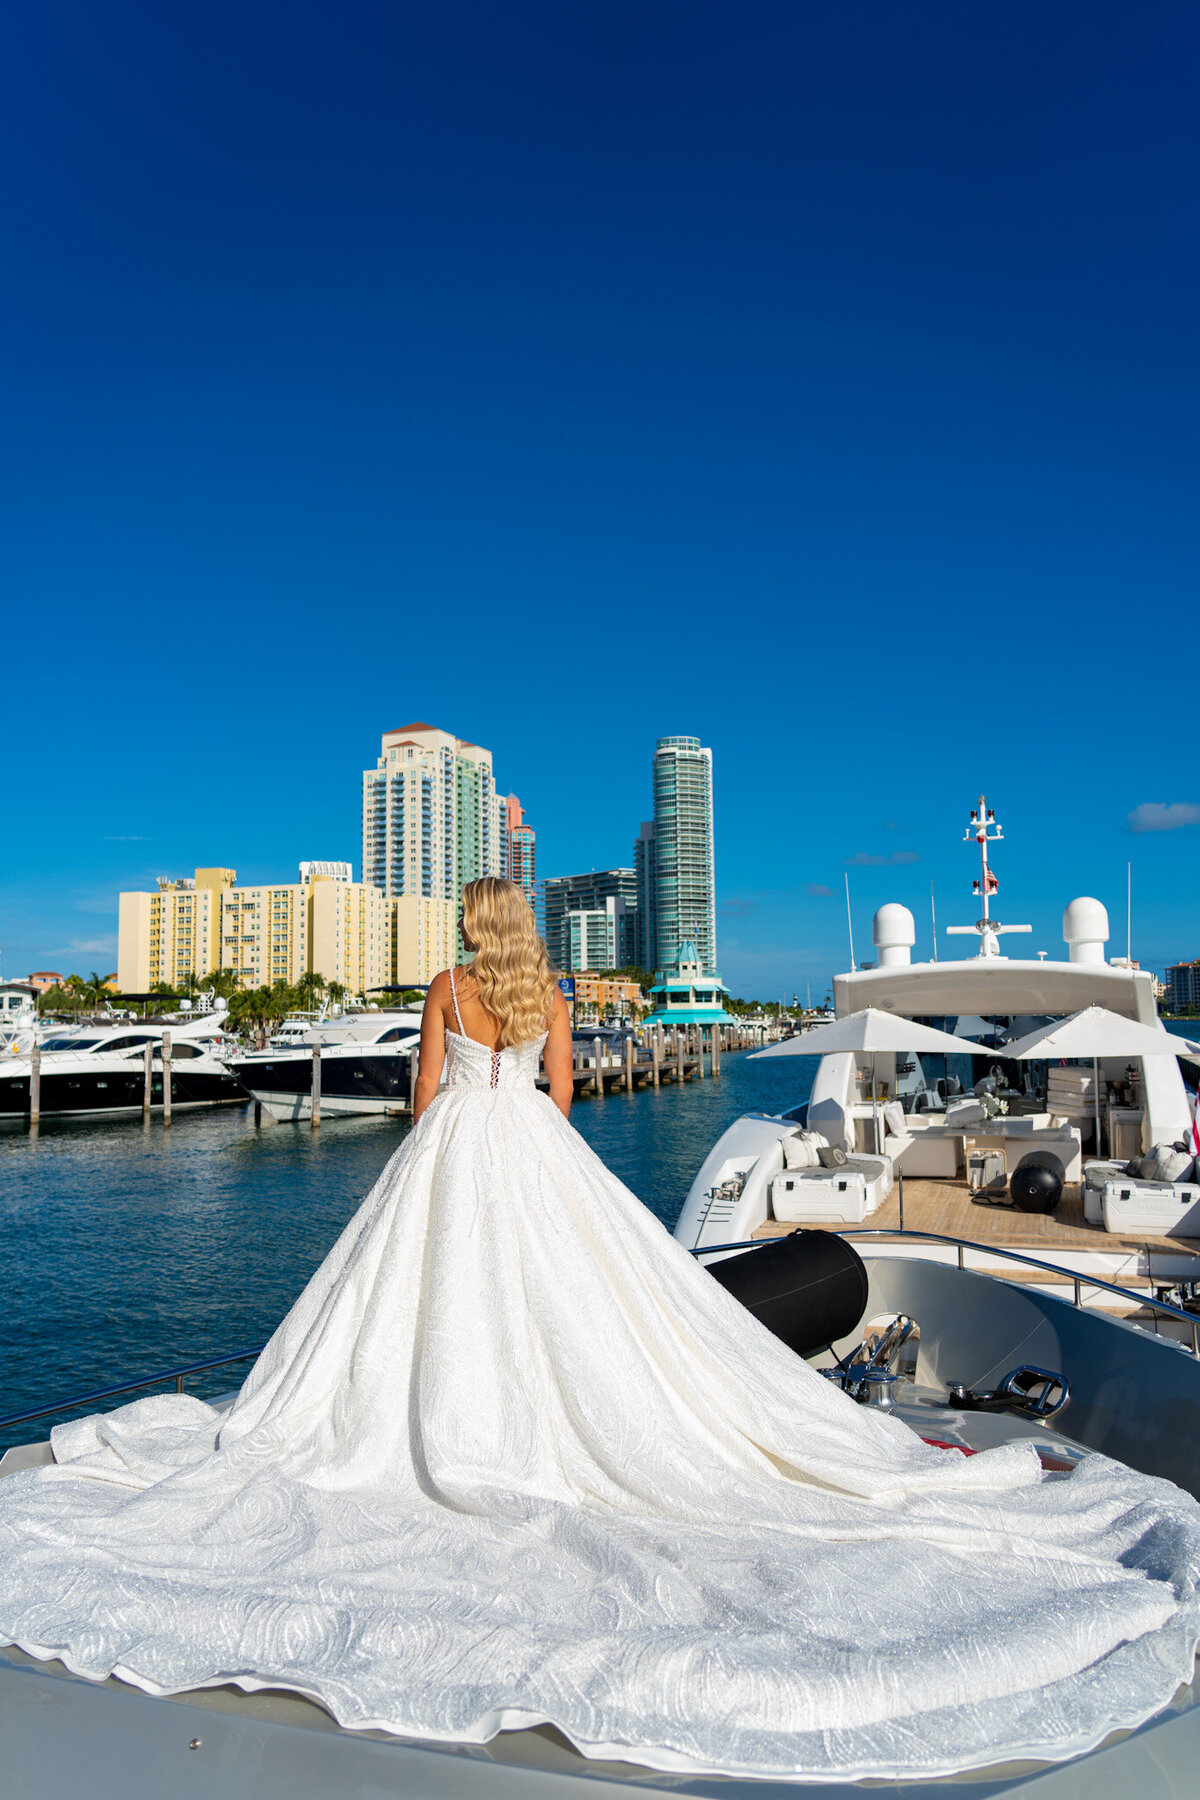 Bride models her pearl-detailed fit and flare wedding dress aboard luxury yacht.